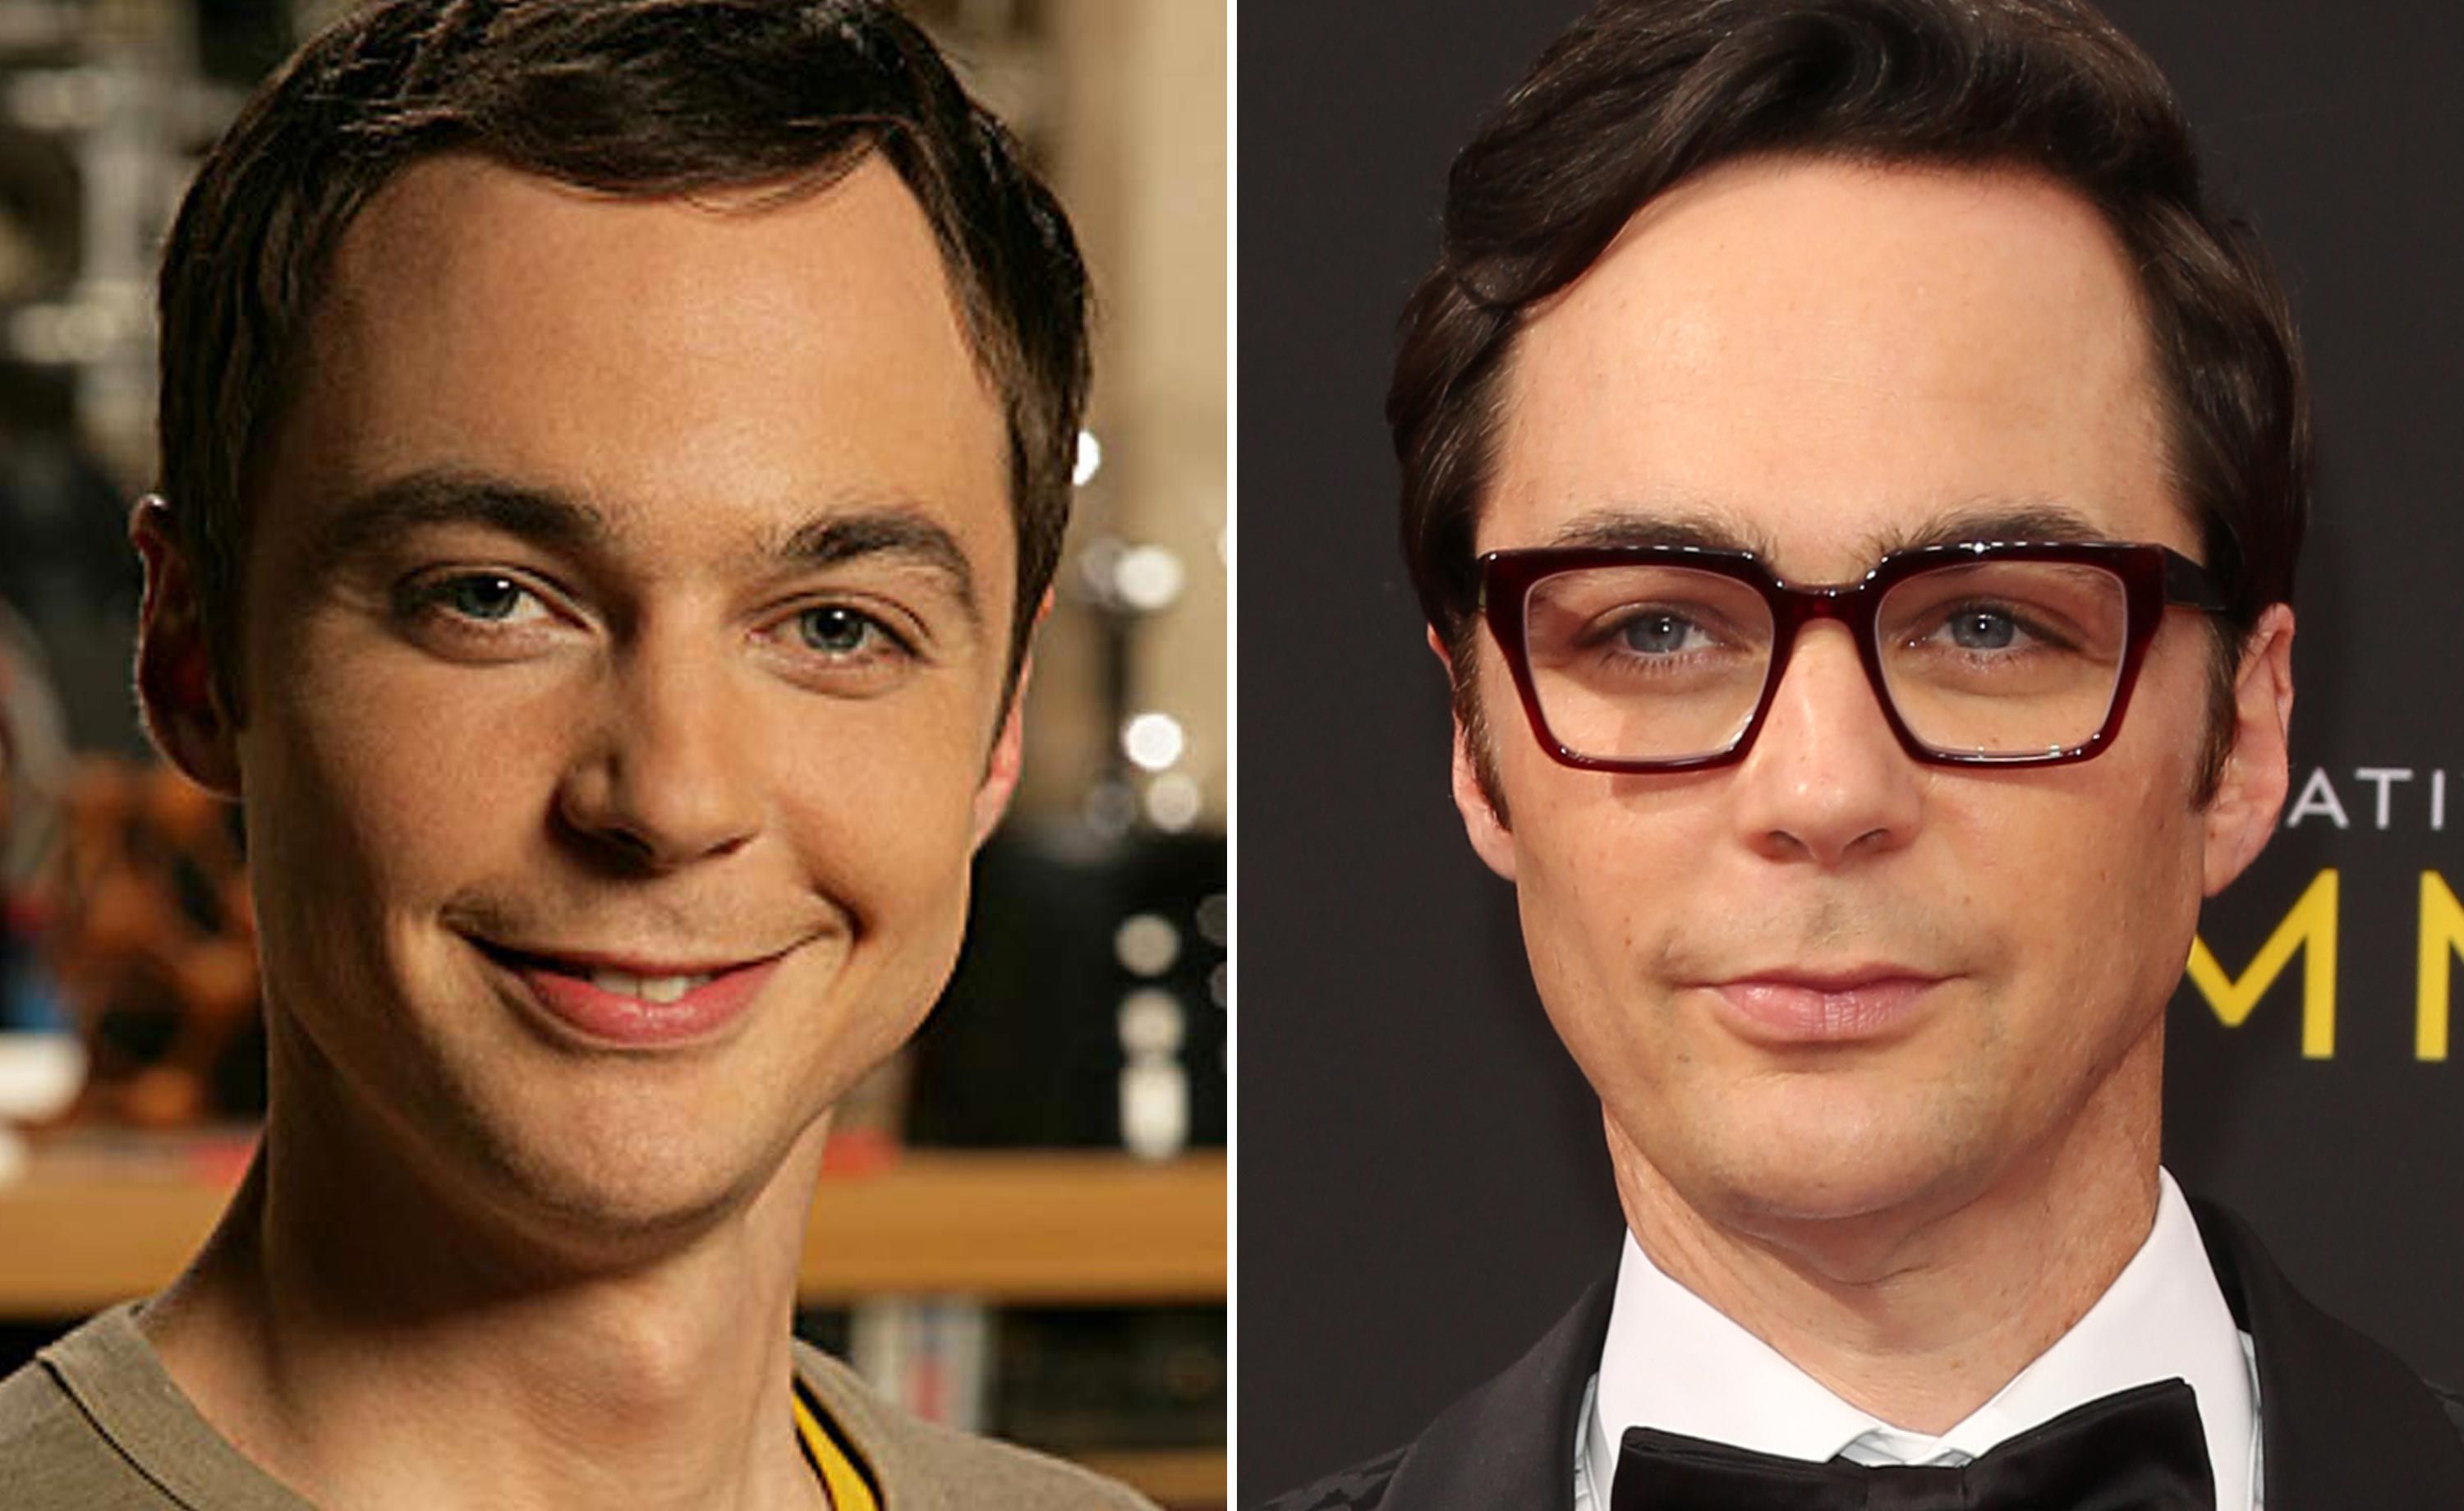 The Big Bang Theory' Cast: Where Are They Now?